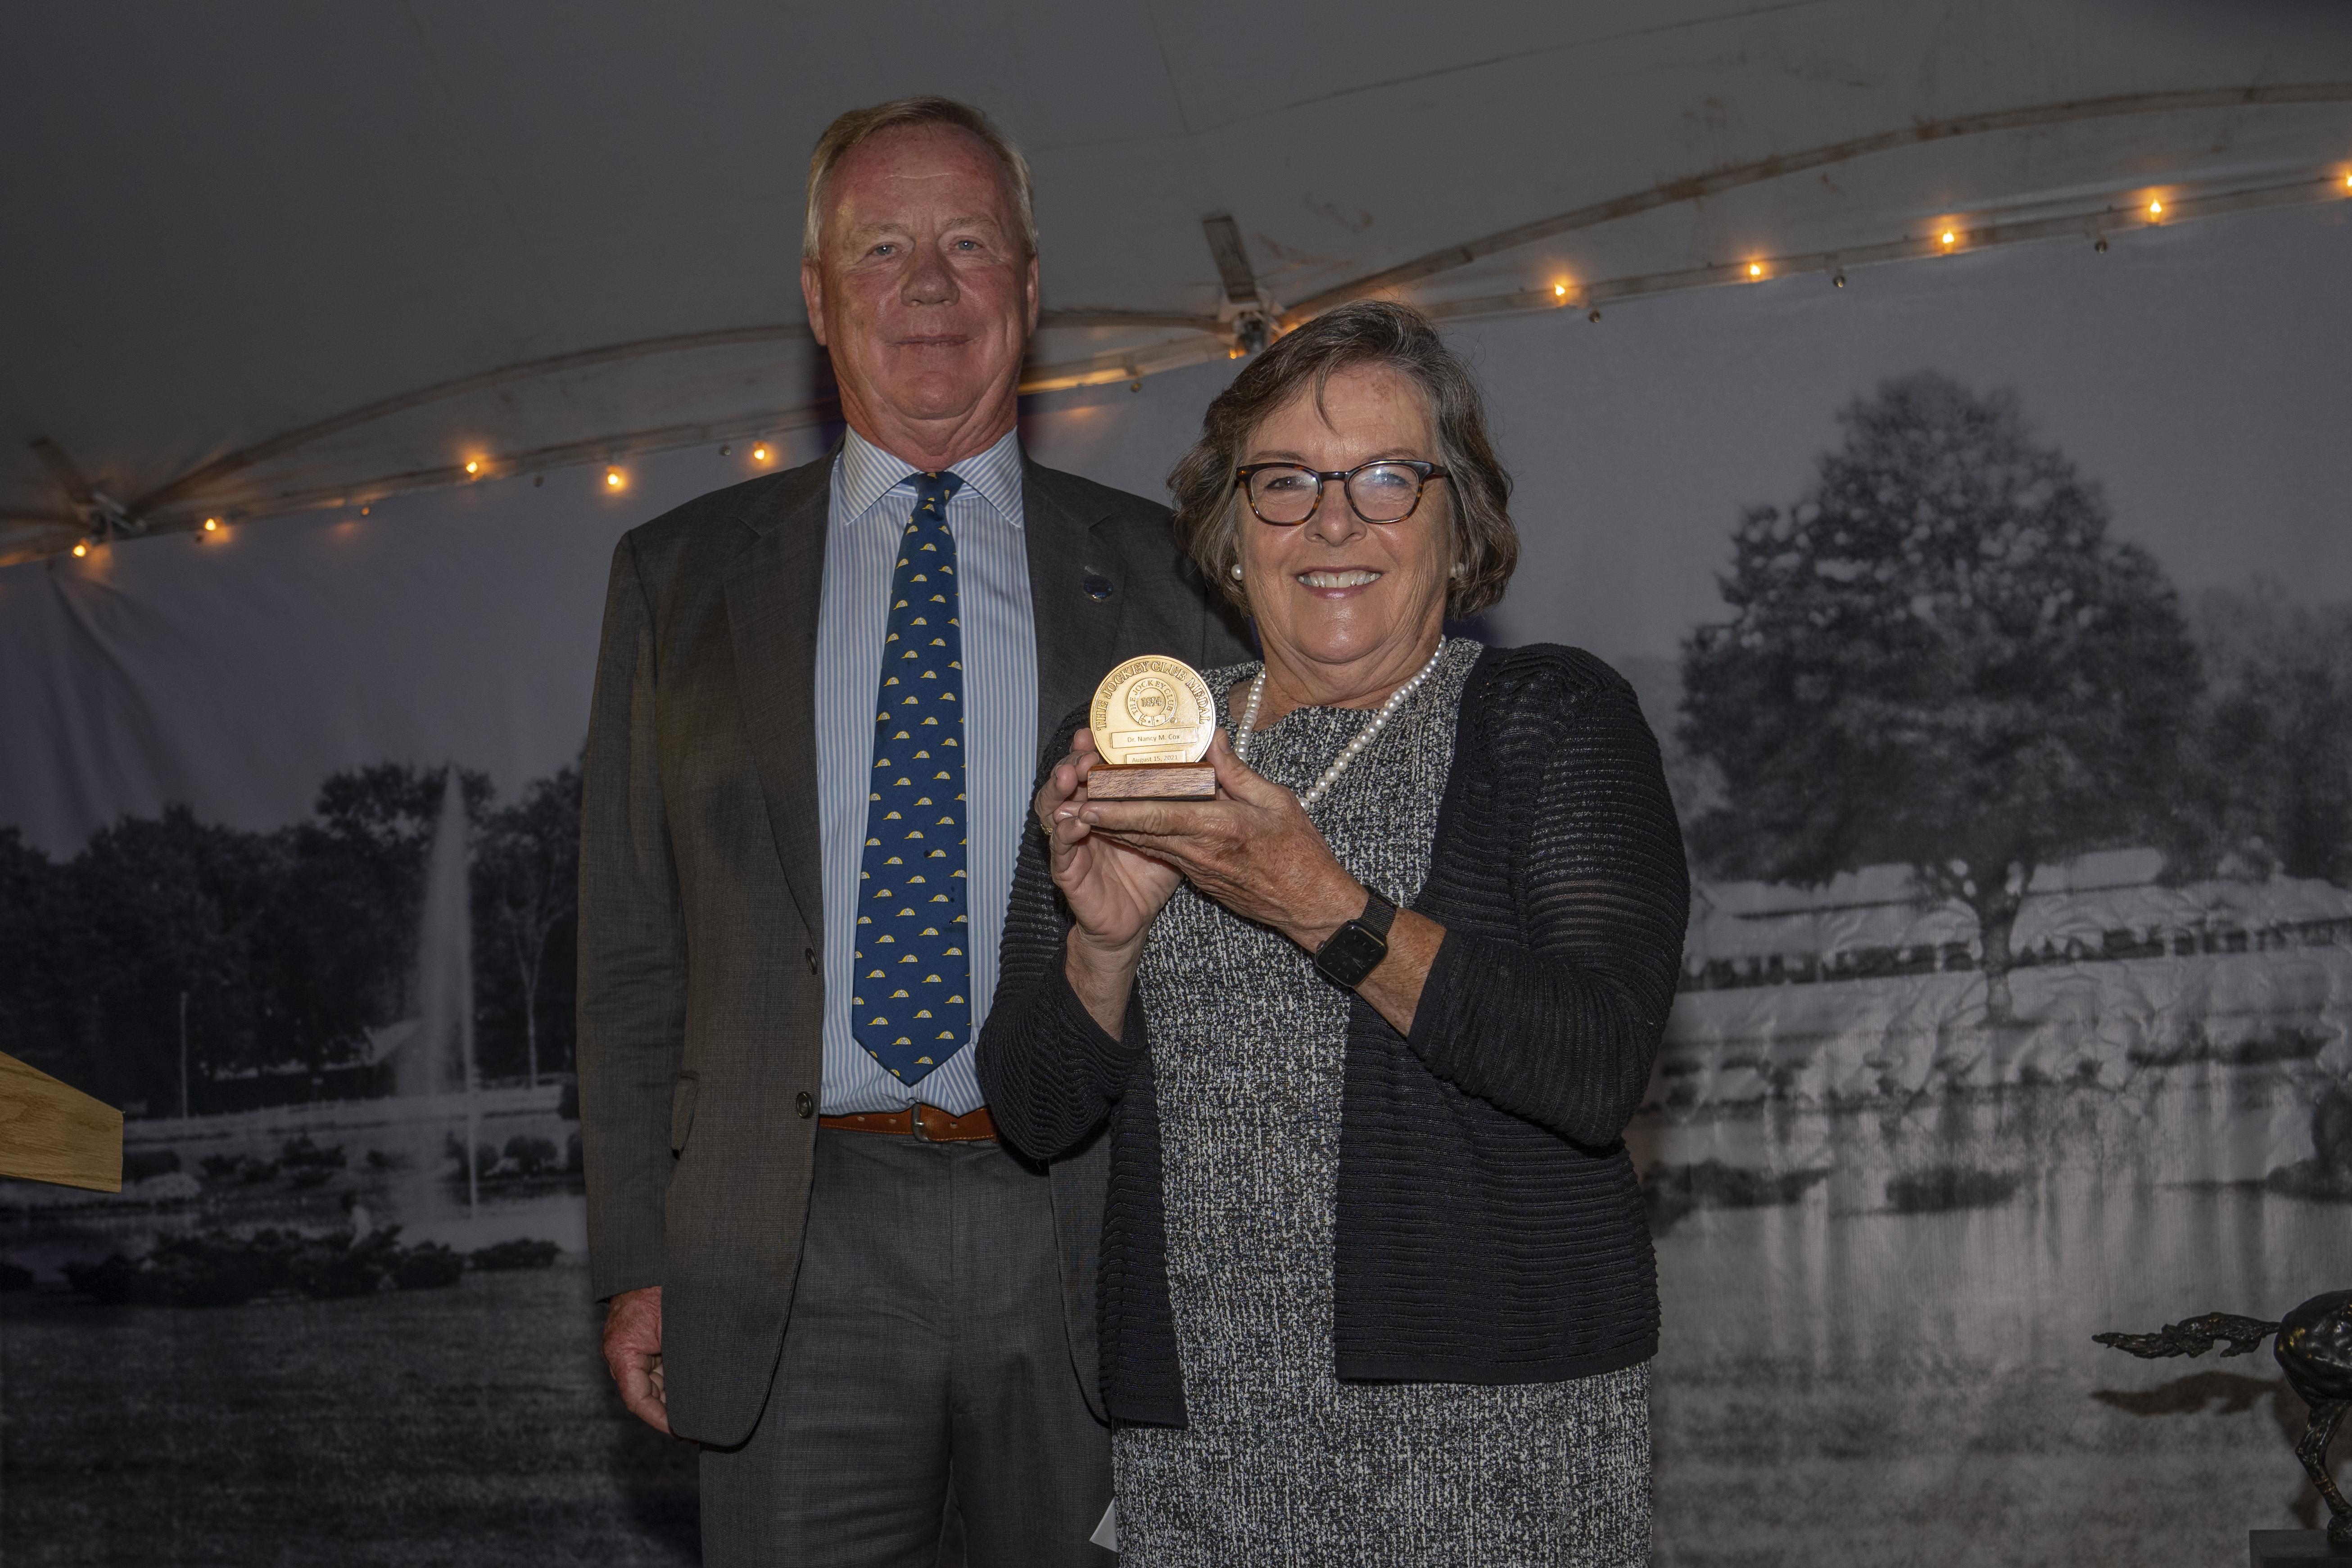 Nancy Cox and Stuart S. Janney, III, Chairman of the Jockey Club, Aug. 14, at The Jockey Club Chairman’s Dinner at the National Museum of Racing and Hall of Fame